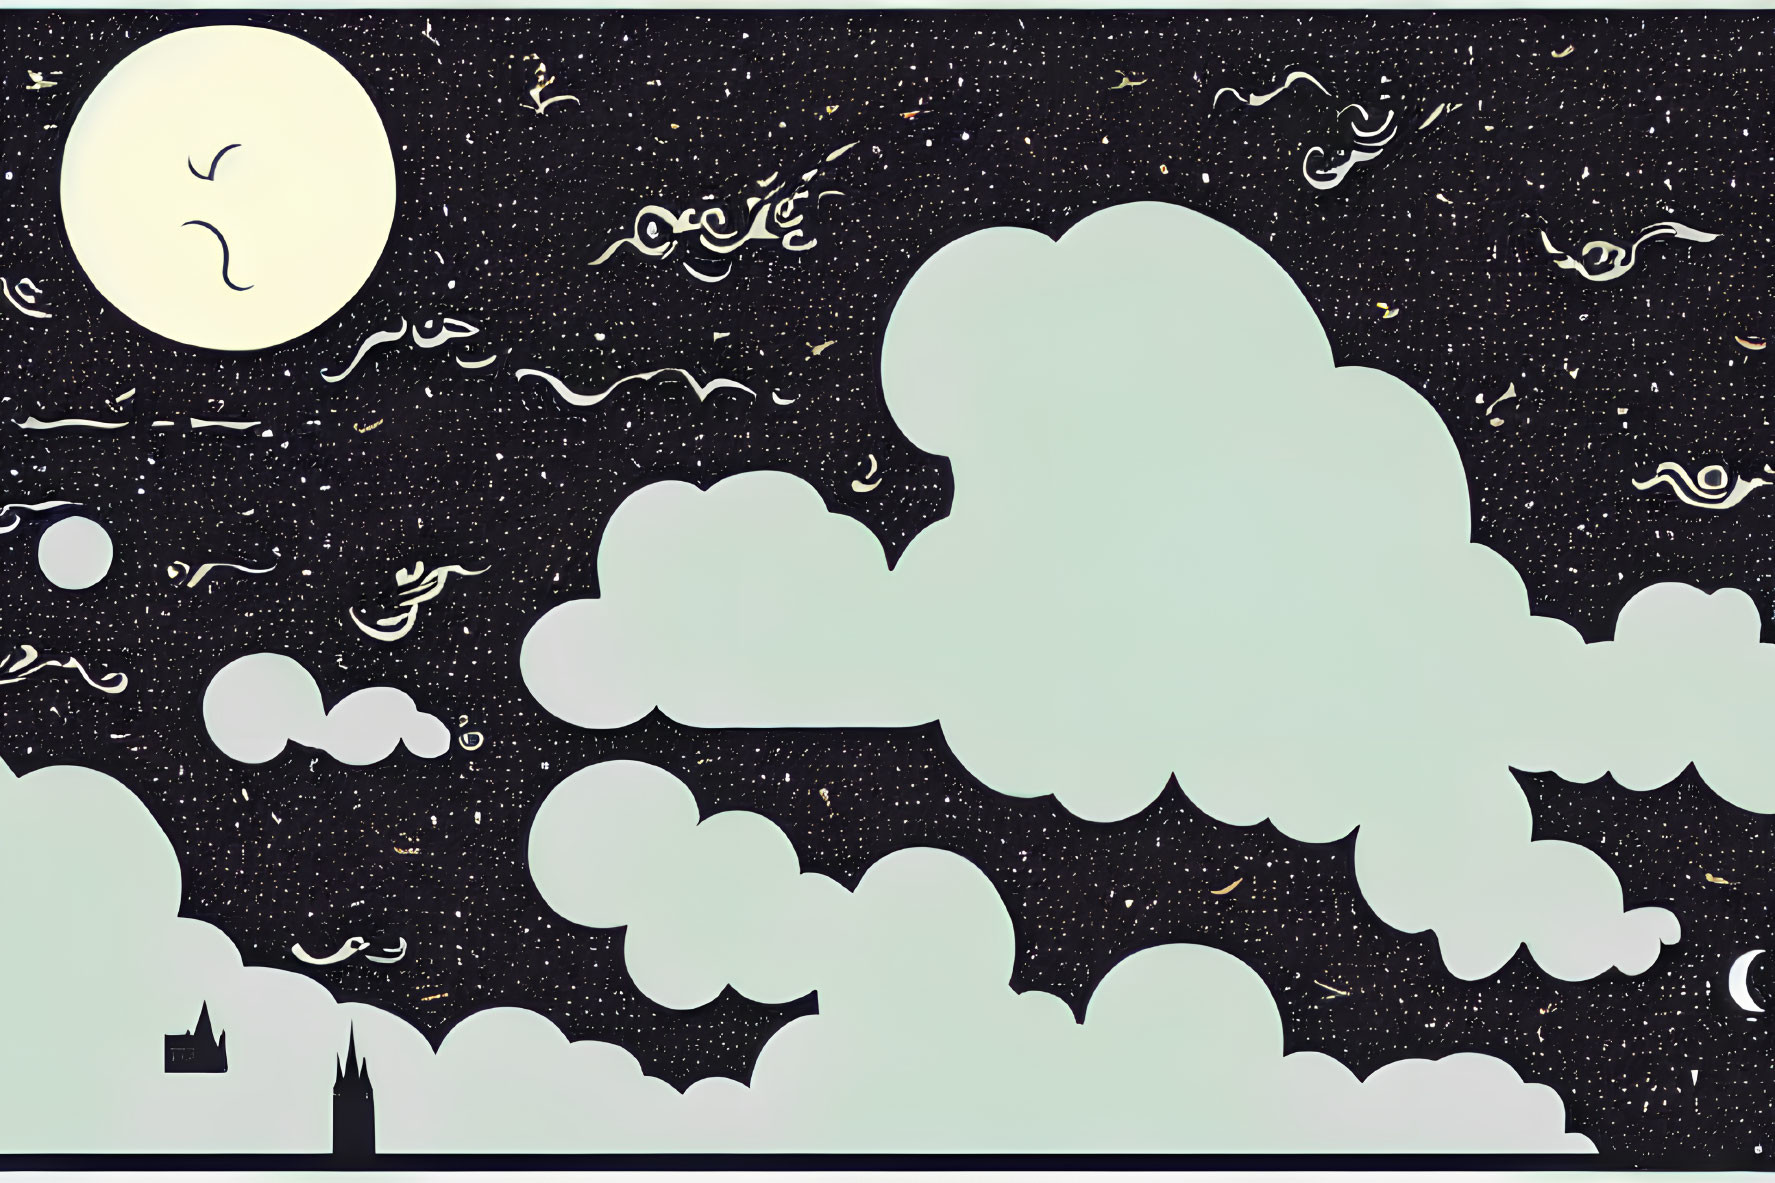 Stylized night sky illustration with moon, stars, clouds, squiggles, and circles